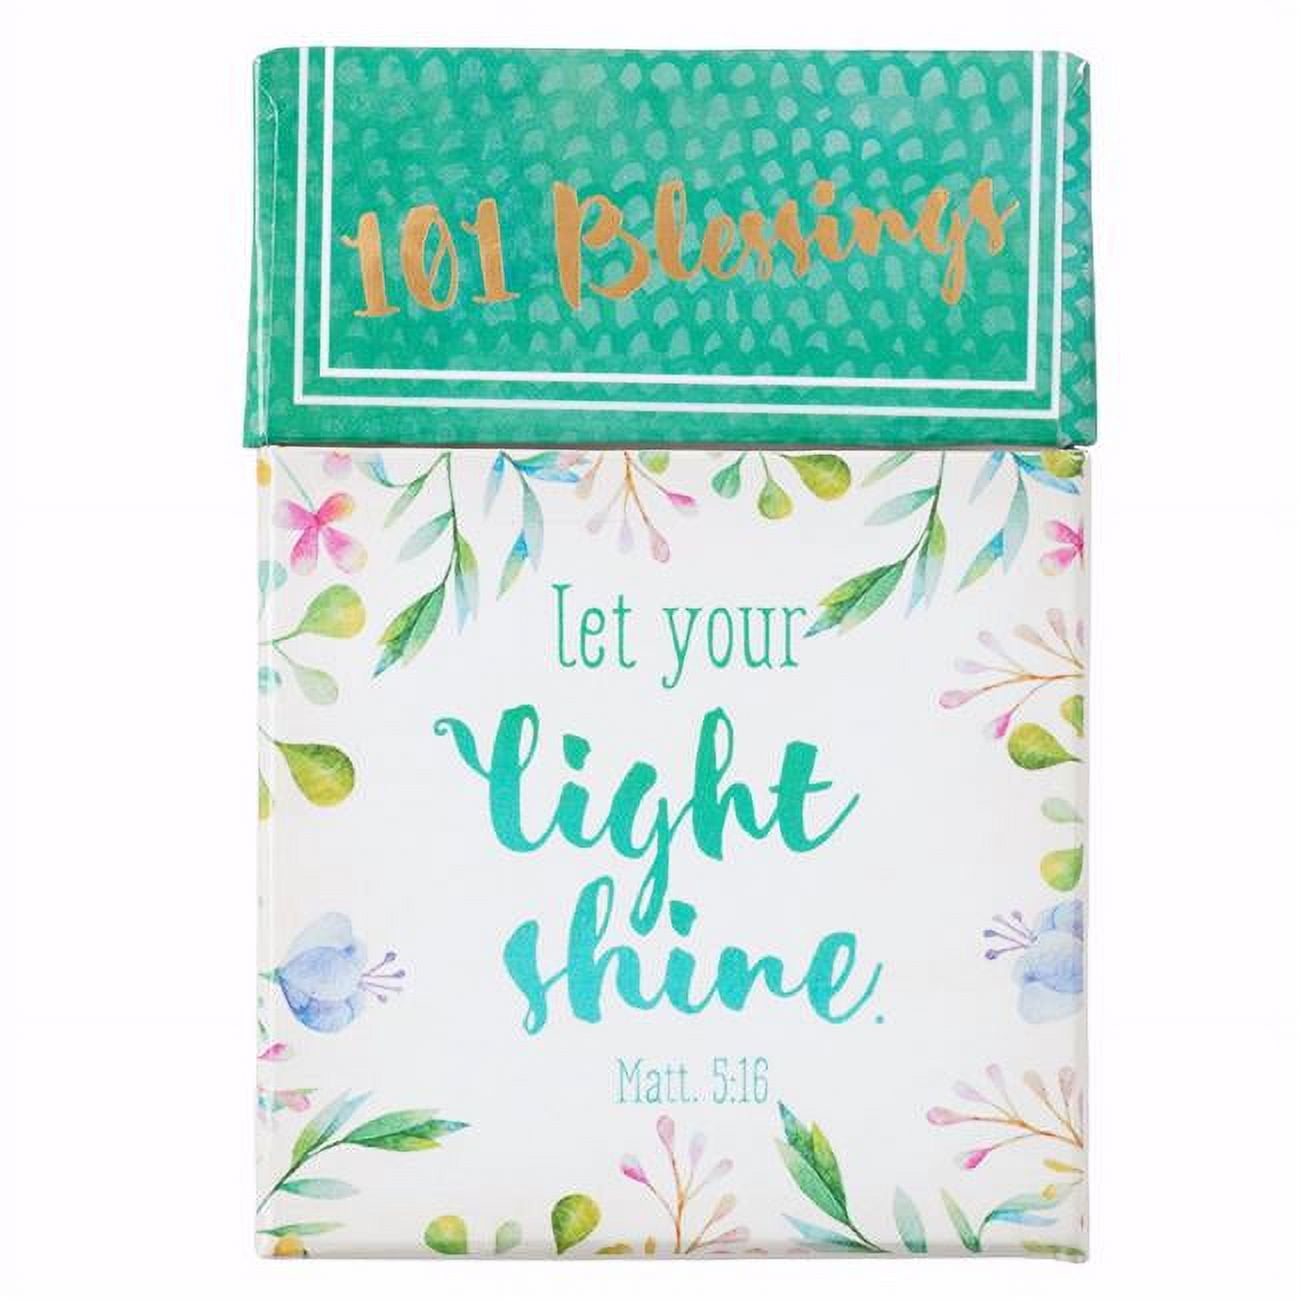 Picture of Christian Art Gifts 14604X Box of Blessings - 101 Blessings-Let Your Light Shine